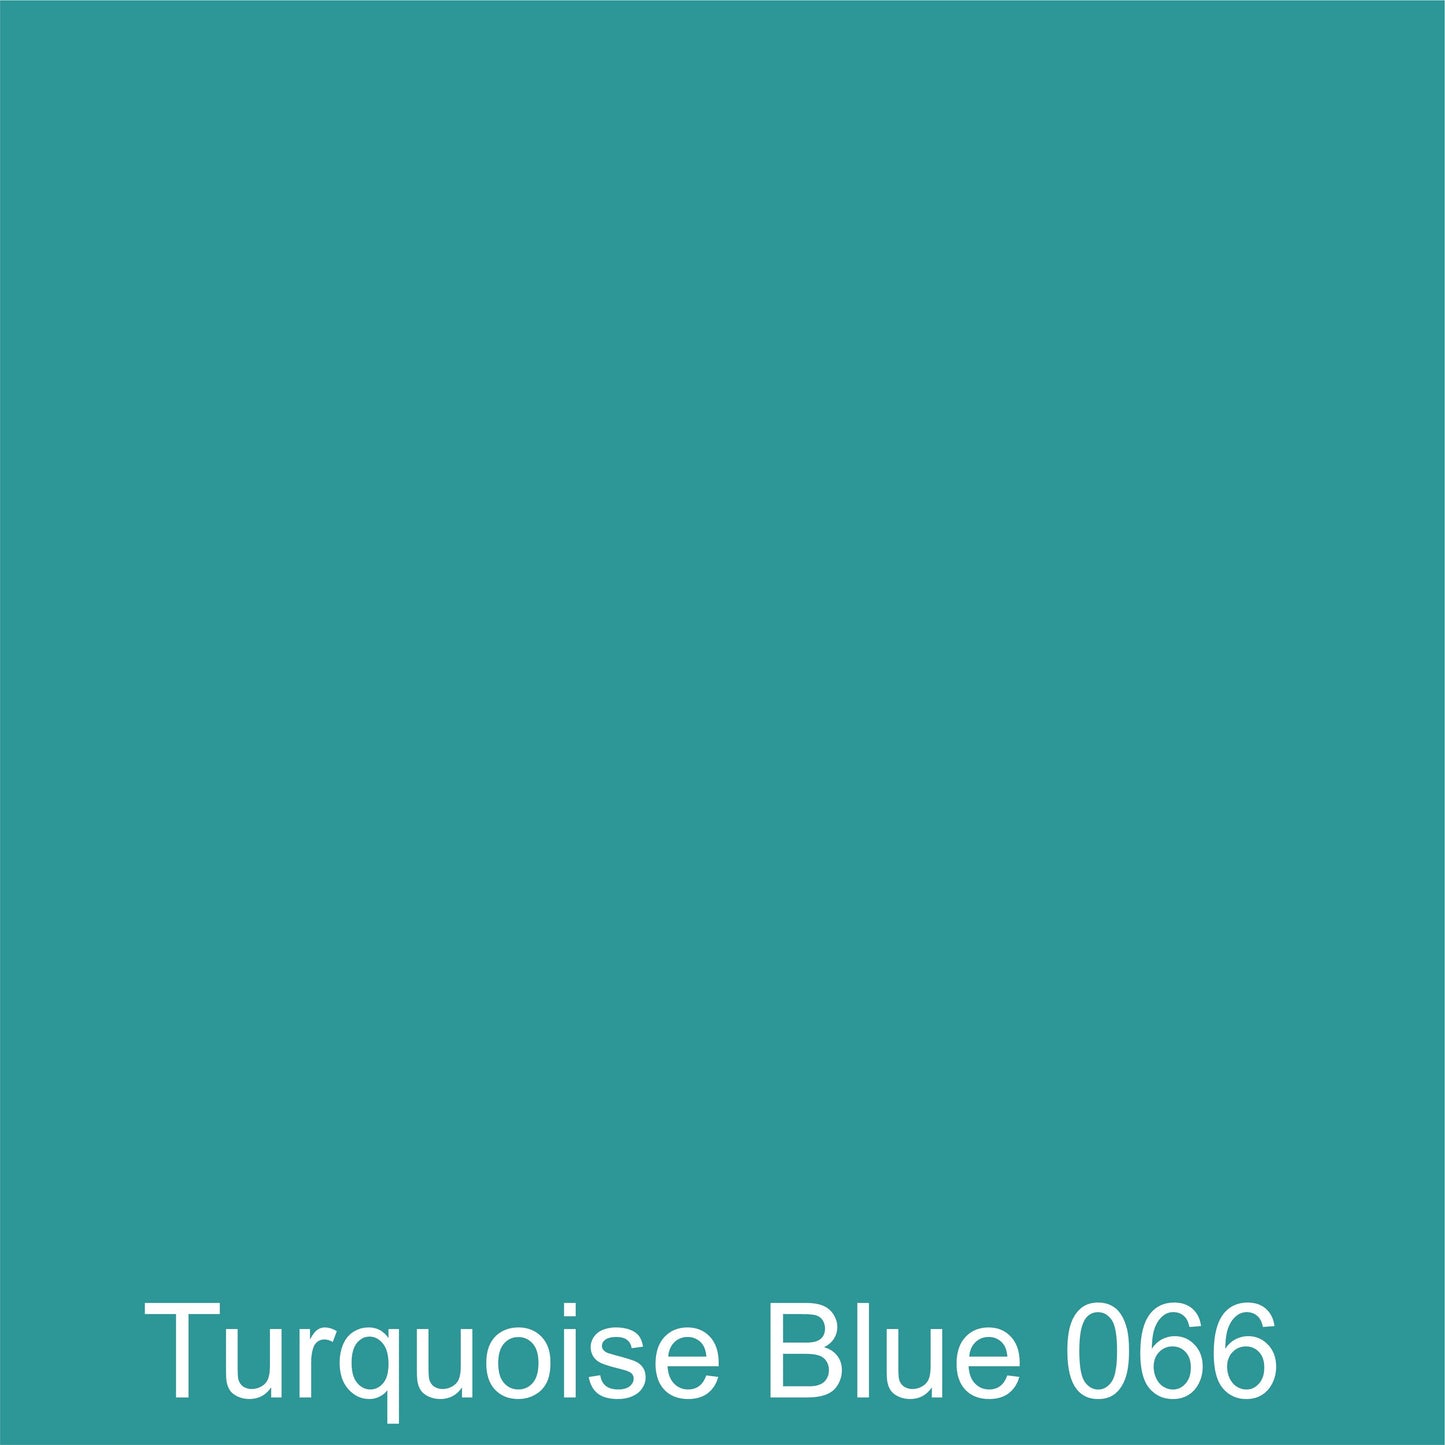 Oracal 651 Gloss :- Turquoise Blue - 066 - 300mm x 10 Metres